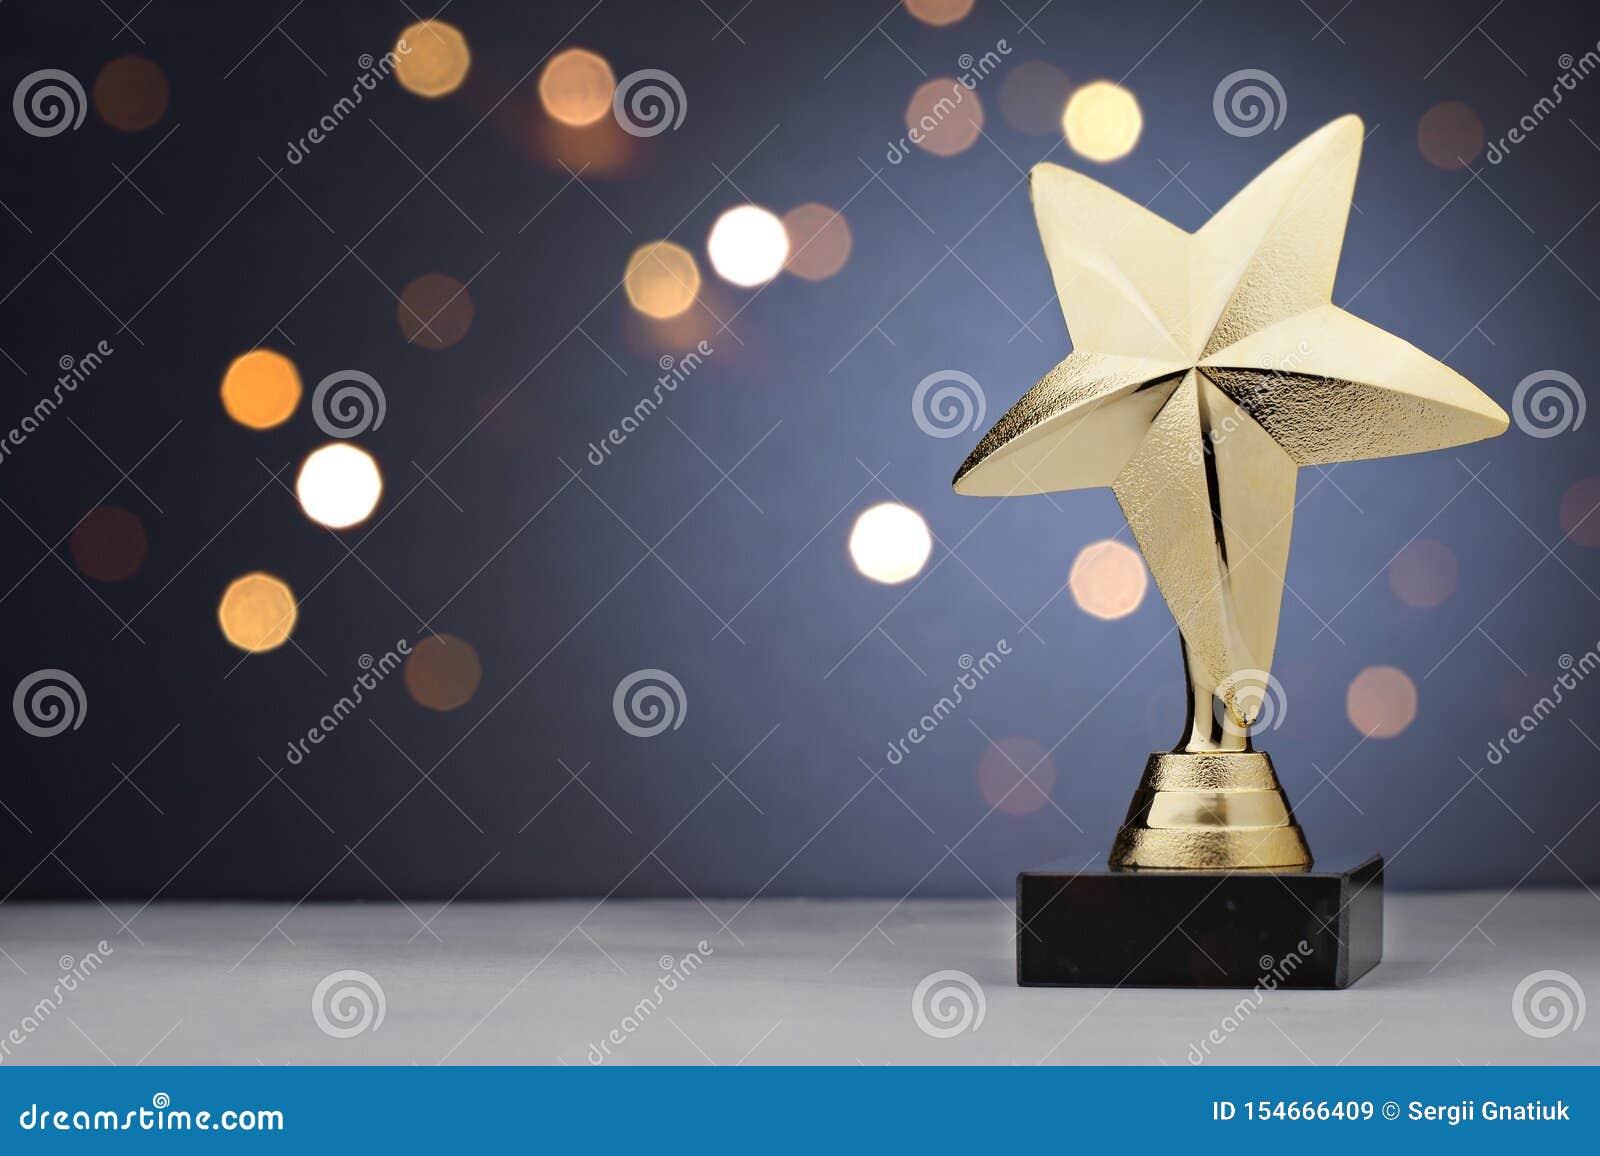 gold star trophy for a winner or champion